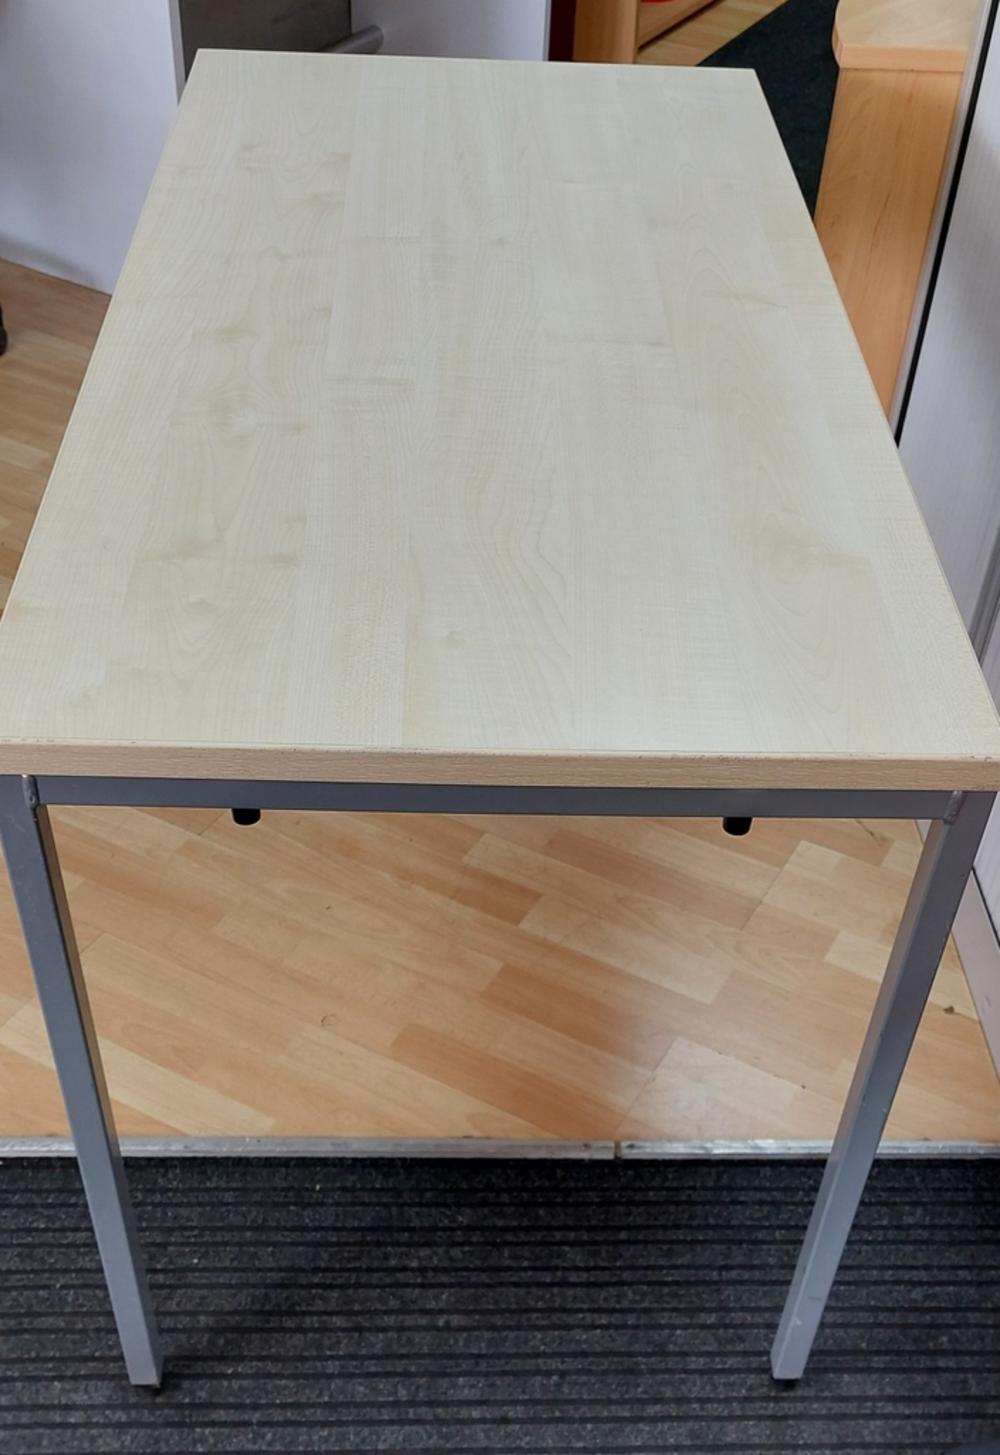 1200 x 600mm Maple Canteen Table 